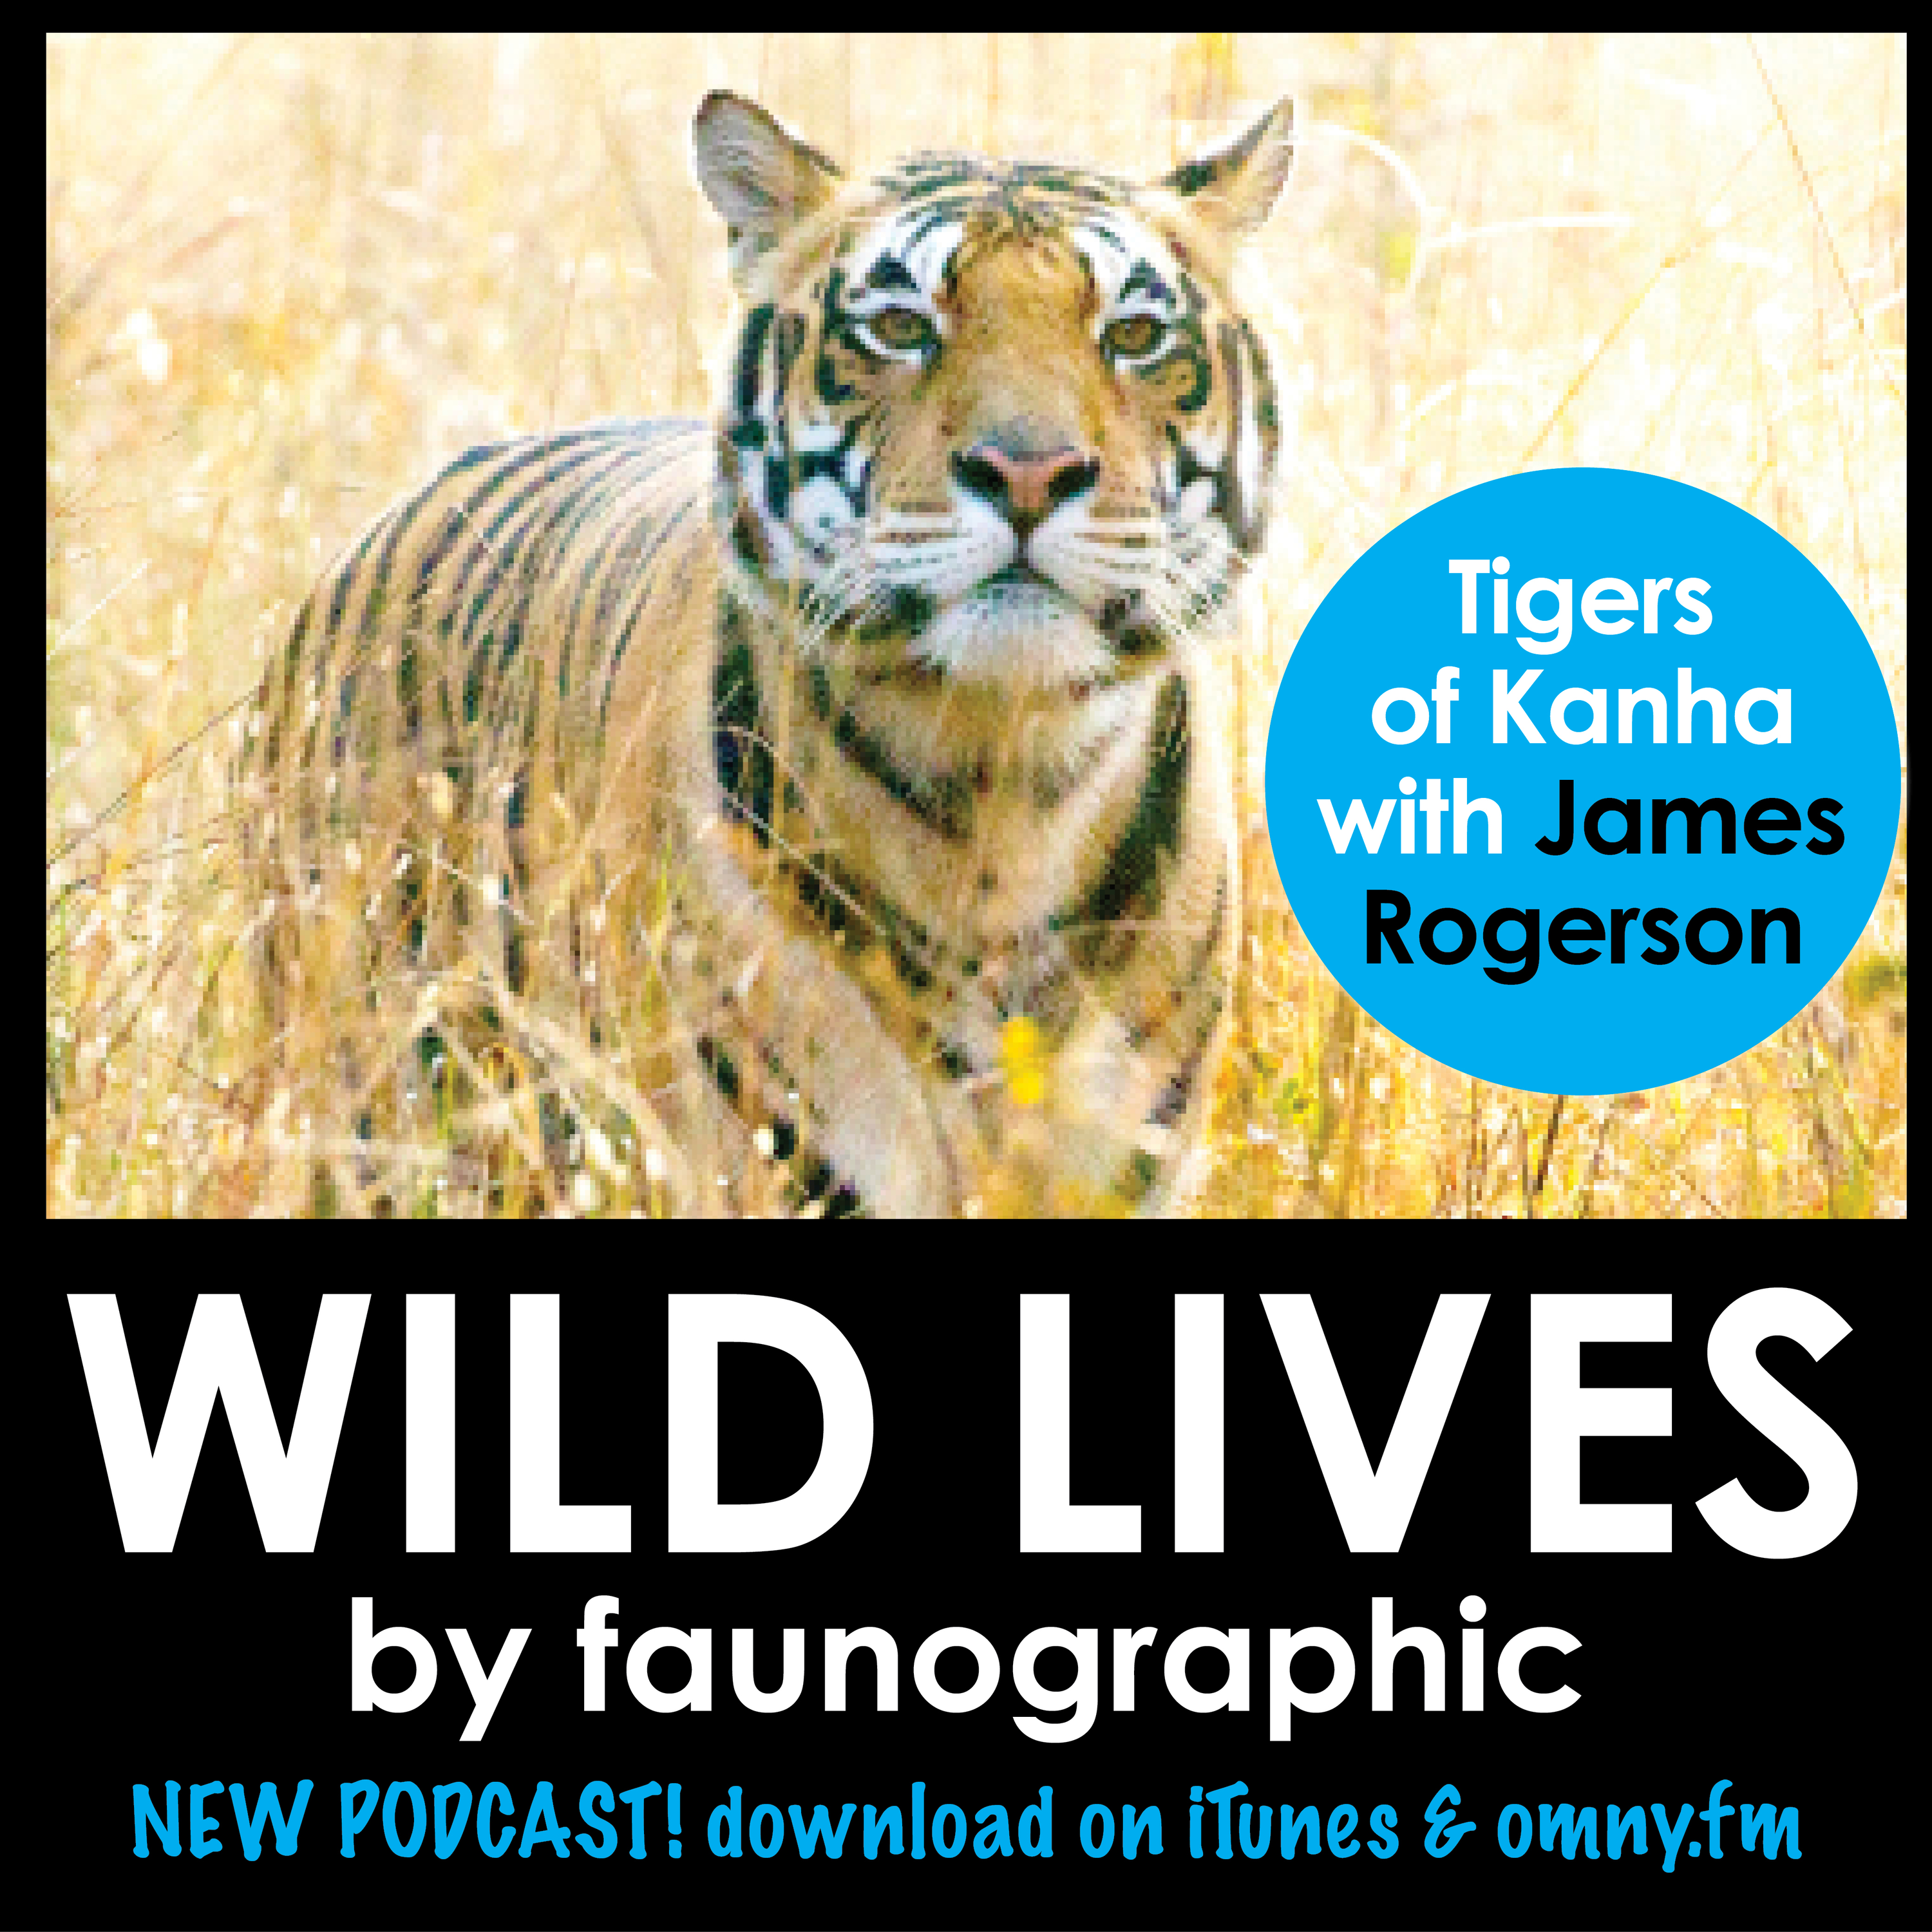 Tigers of Kanha with James Rogerson